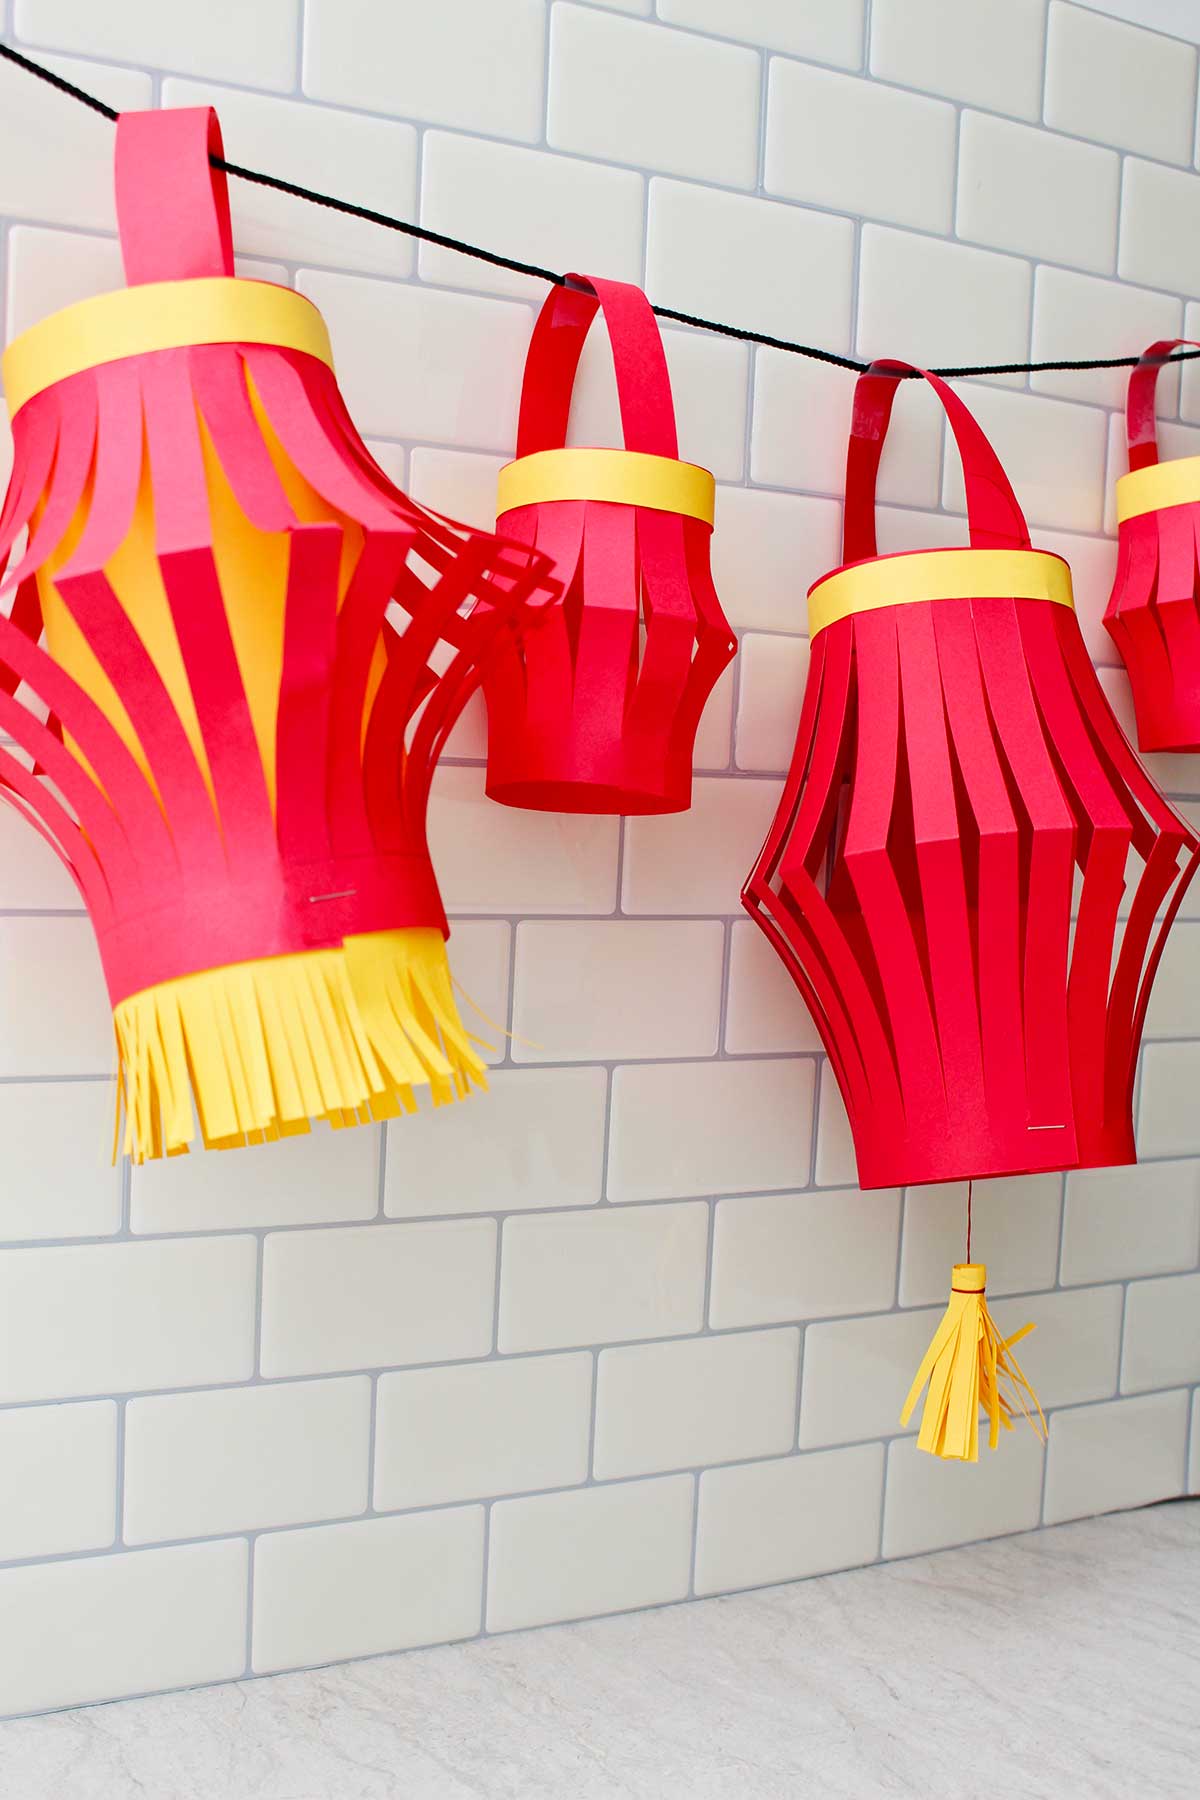 Four completed paper lanterns hanging against a subway tile backdrop.